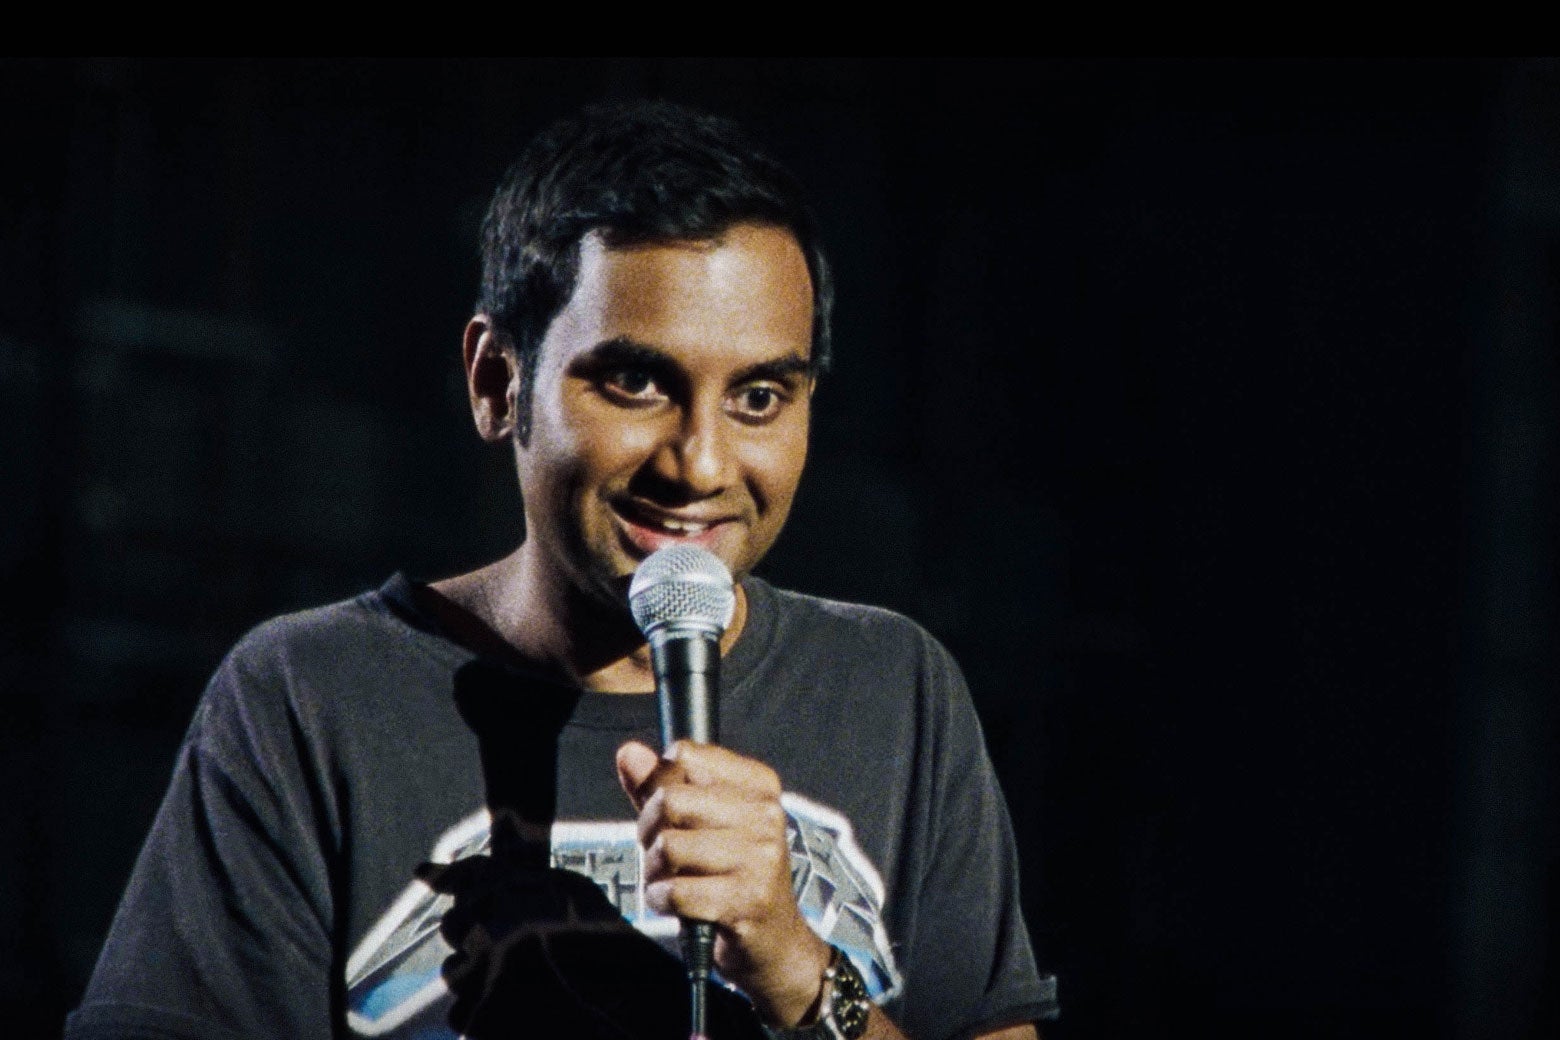 Aziz Ansari in his Right Now stand-up clothes: a Metallica T-shirt and jeans.